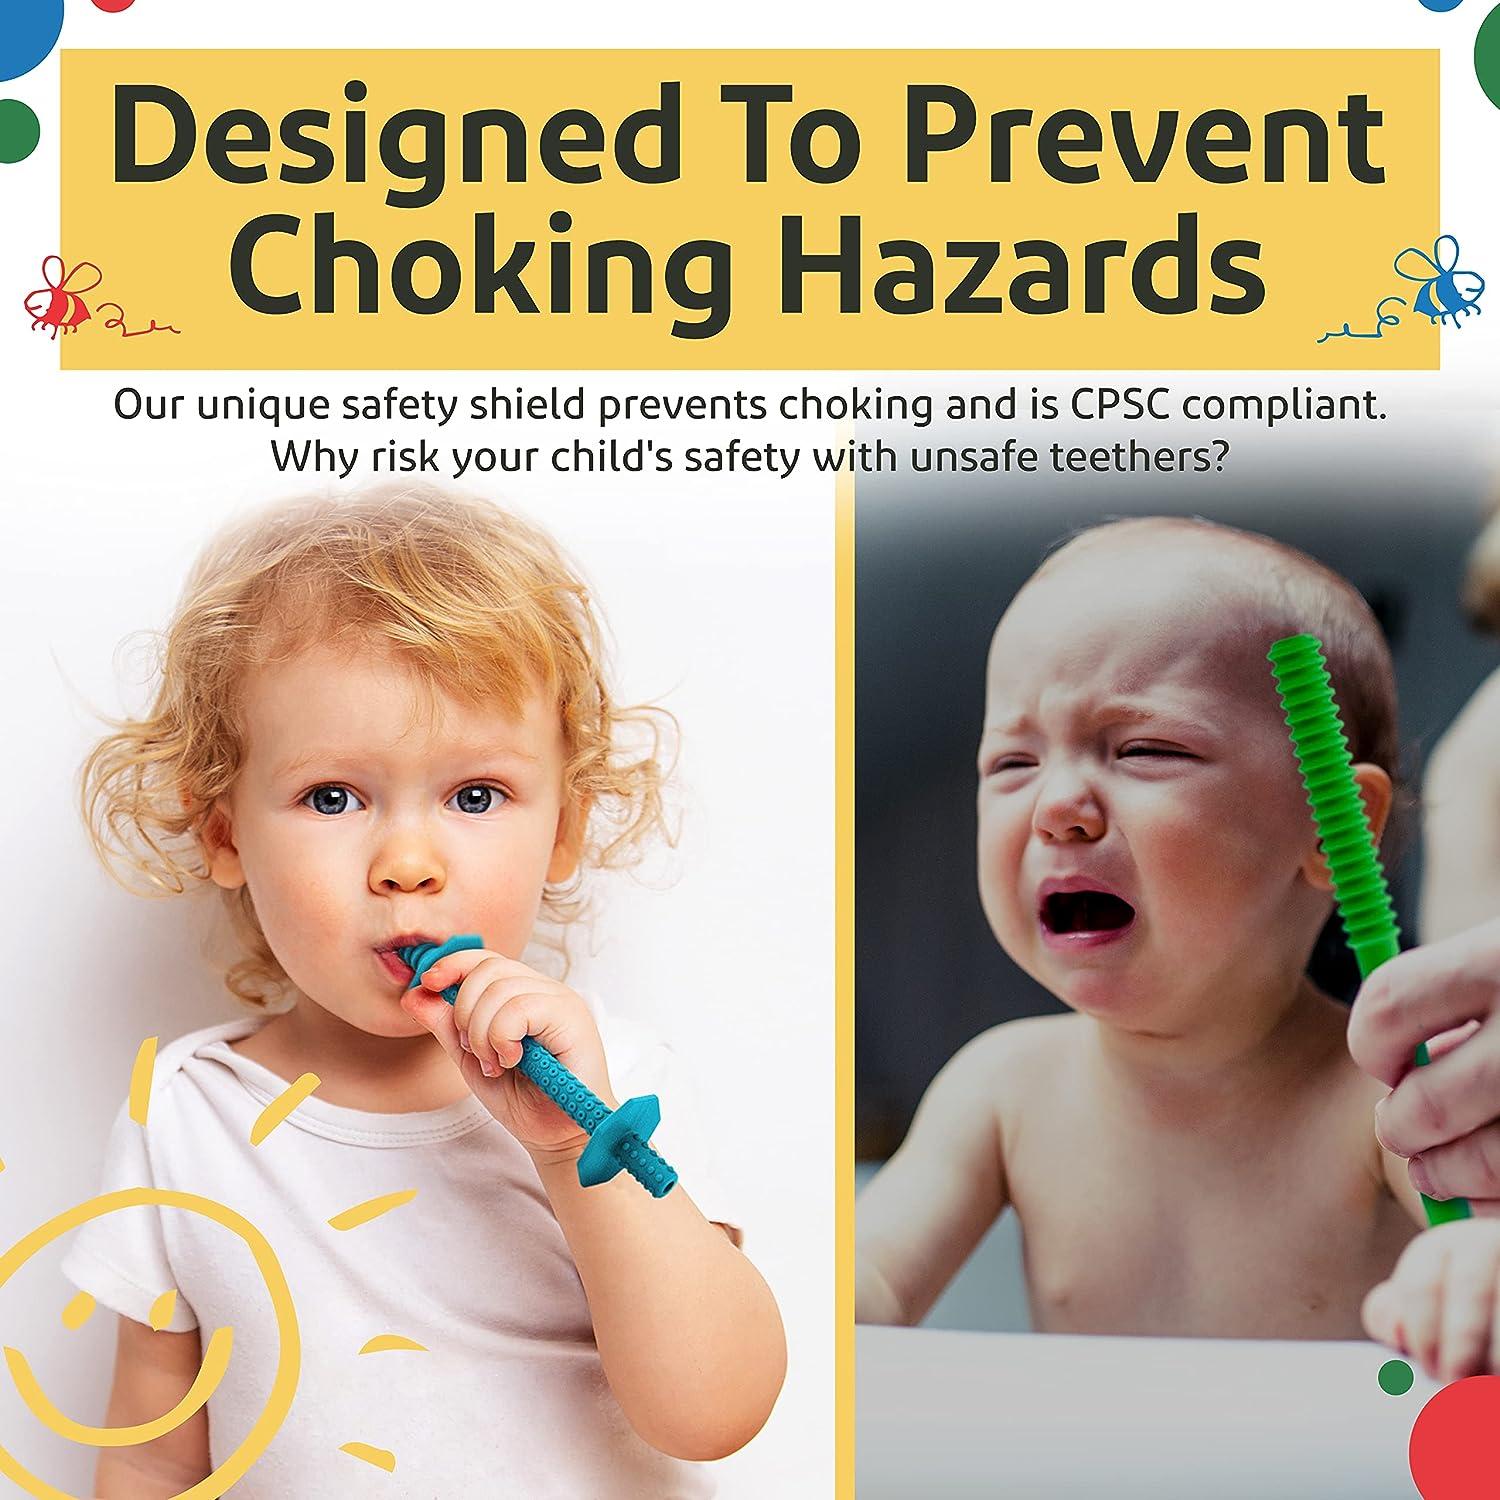 Safety for Your Child: 6 to 12 Months 